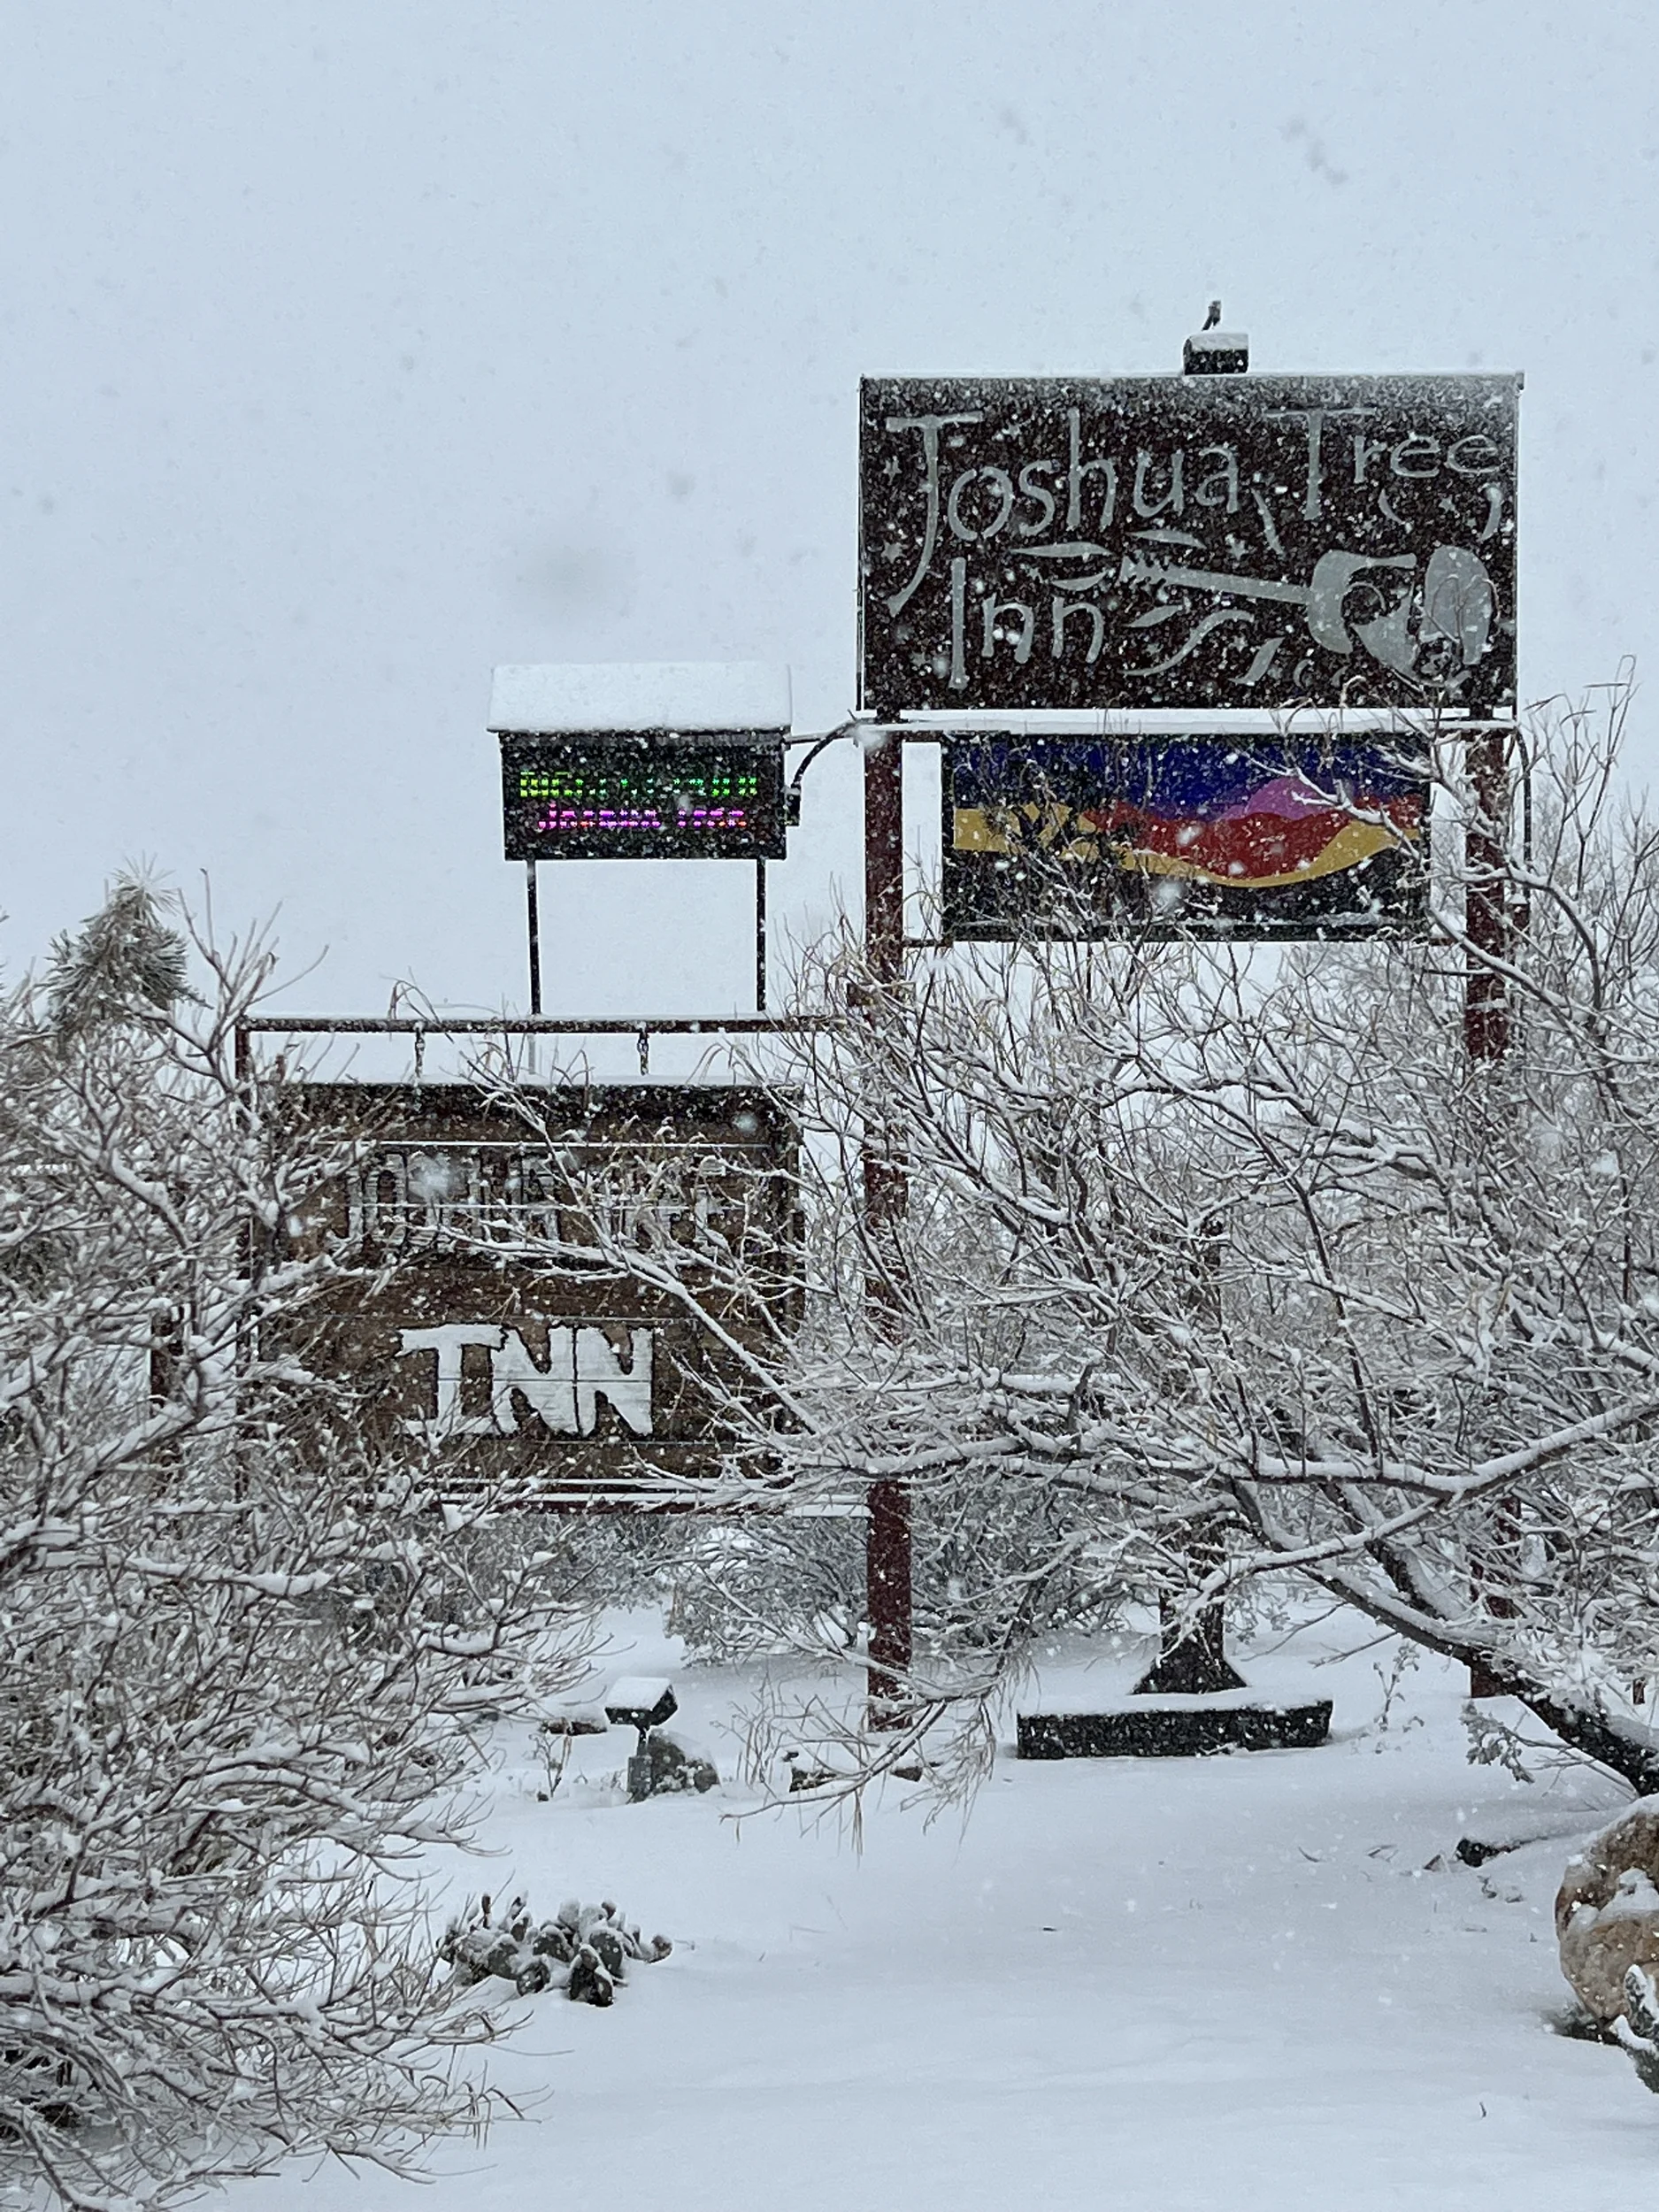 The JoshuaTree street sign and native plants in the snow. 